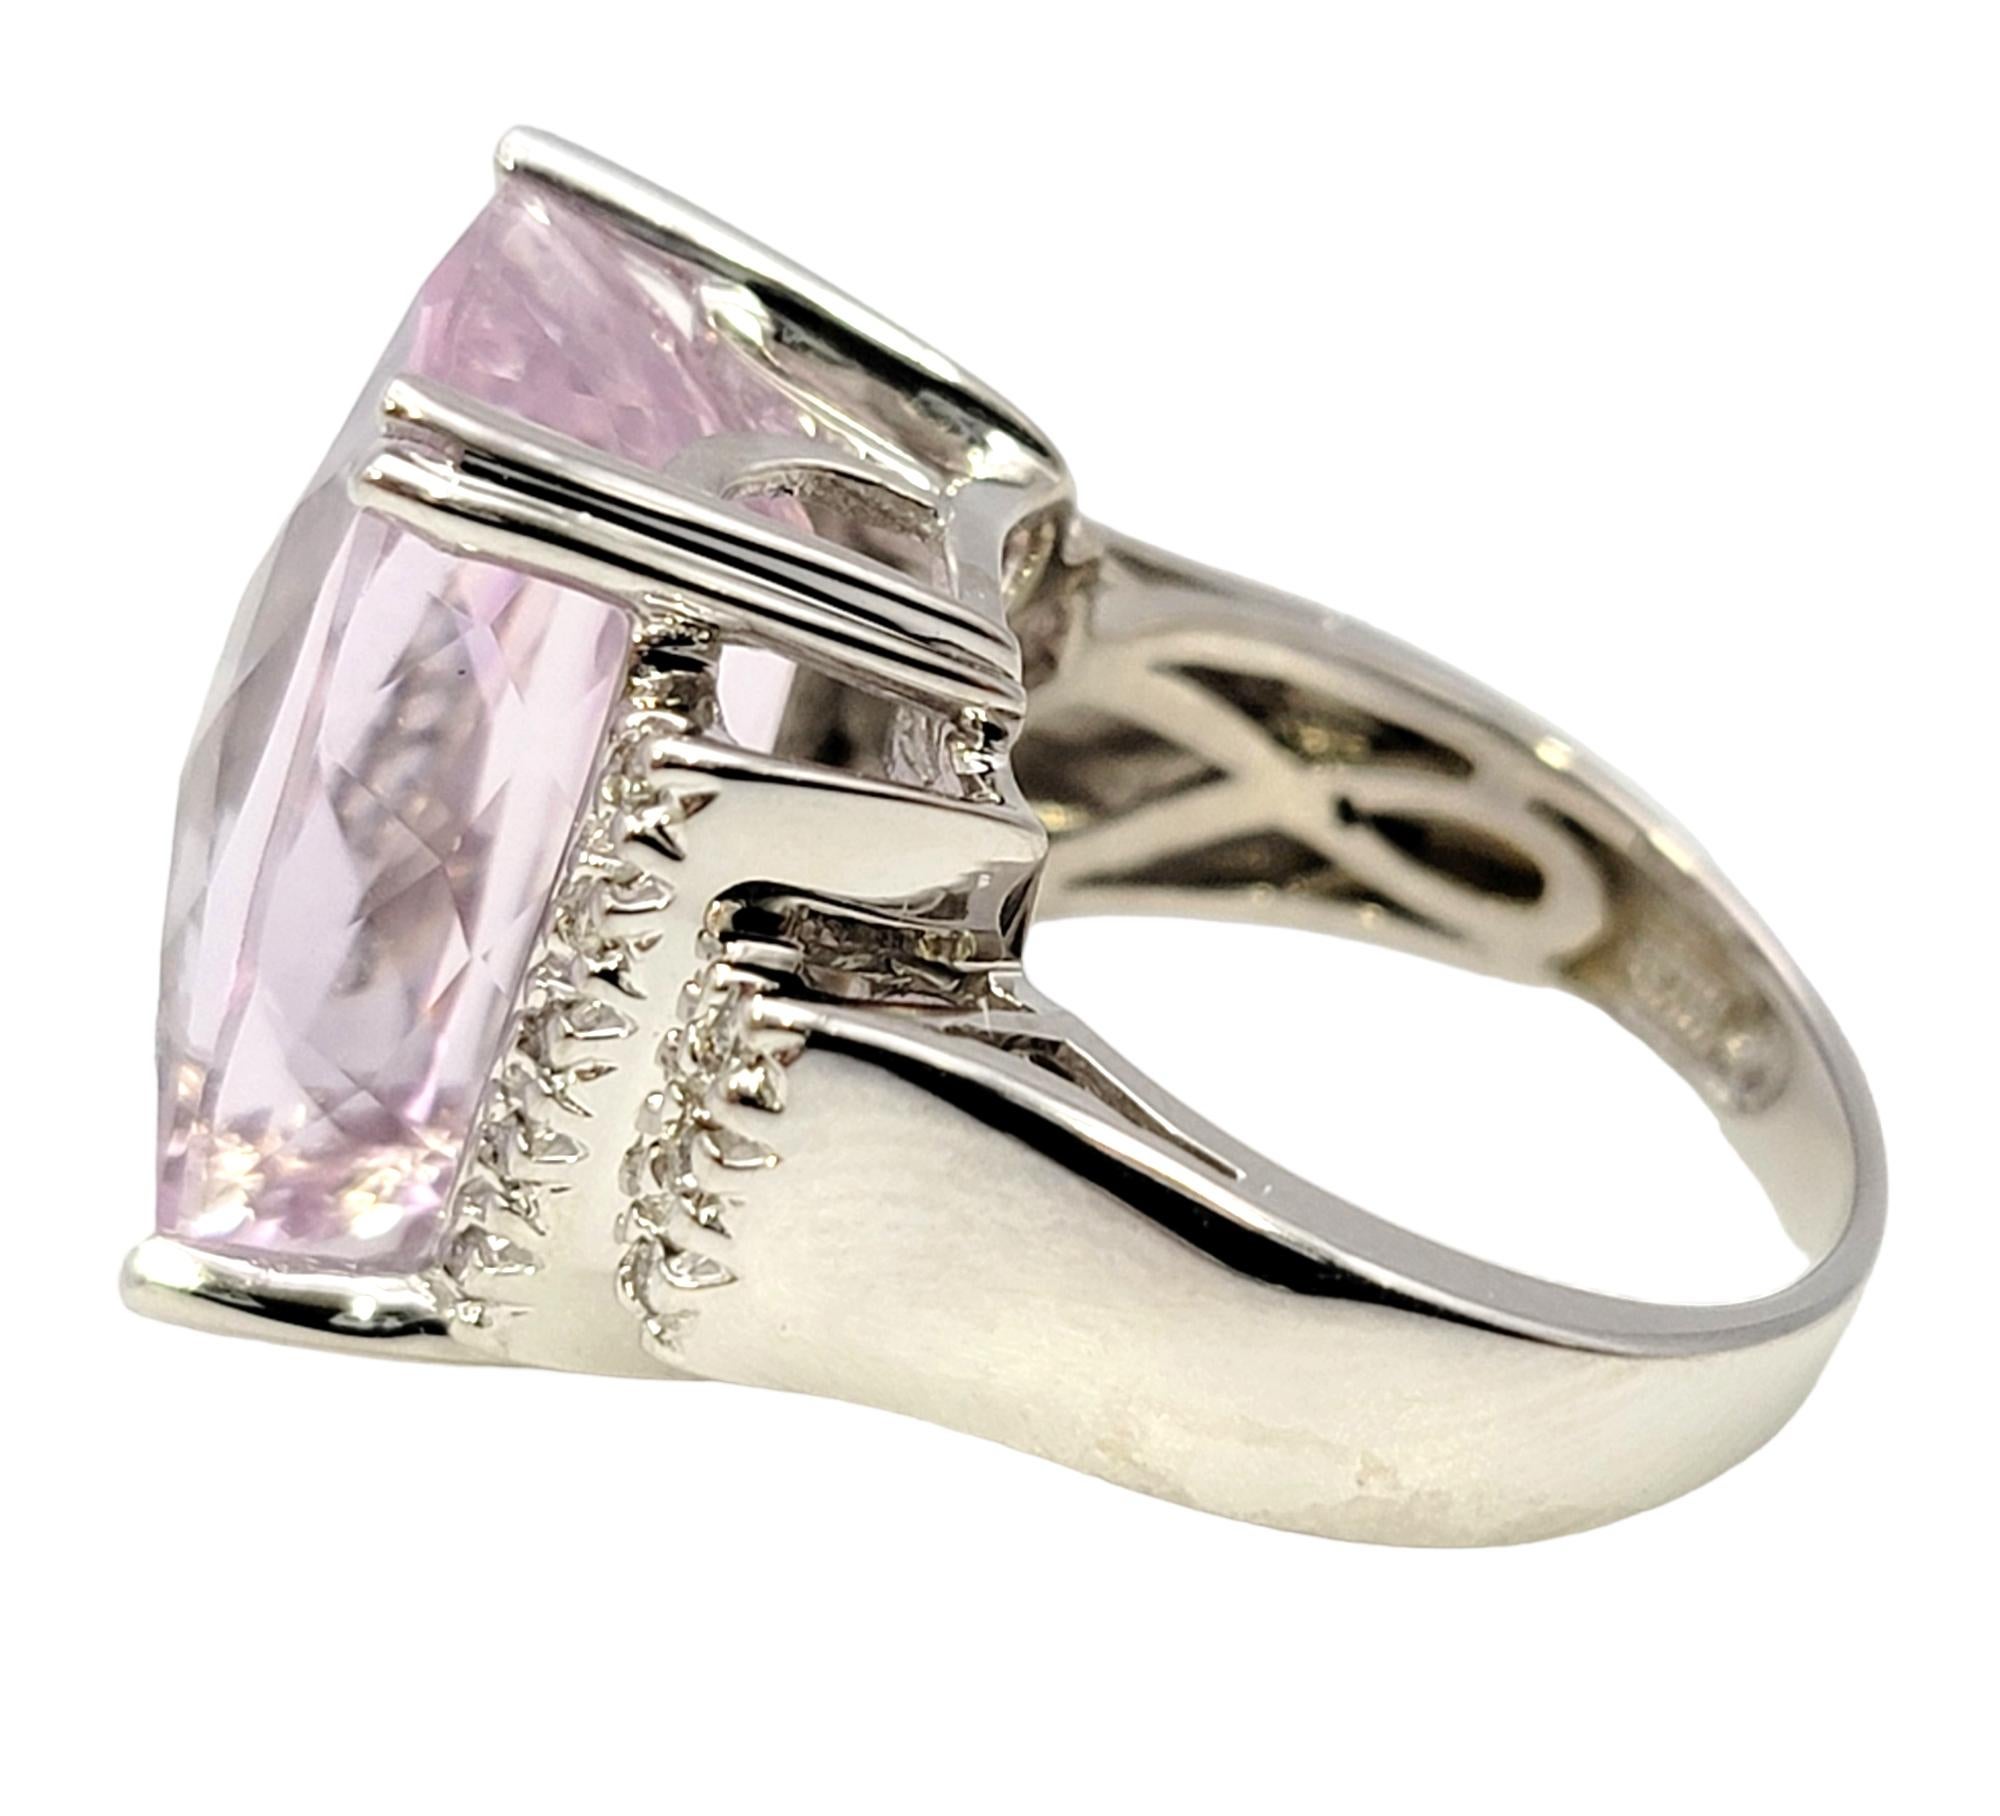 Huge Cushion Checkerboard Cut Kunzite and Diamond Cocktail Ring in 14 Karat Gold For Sale 3